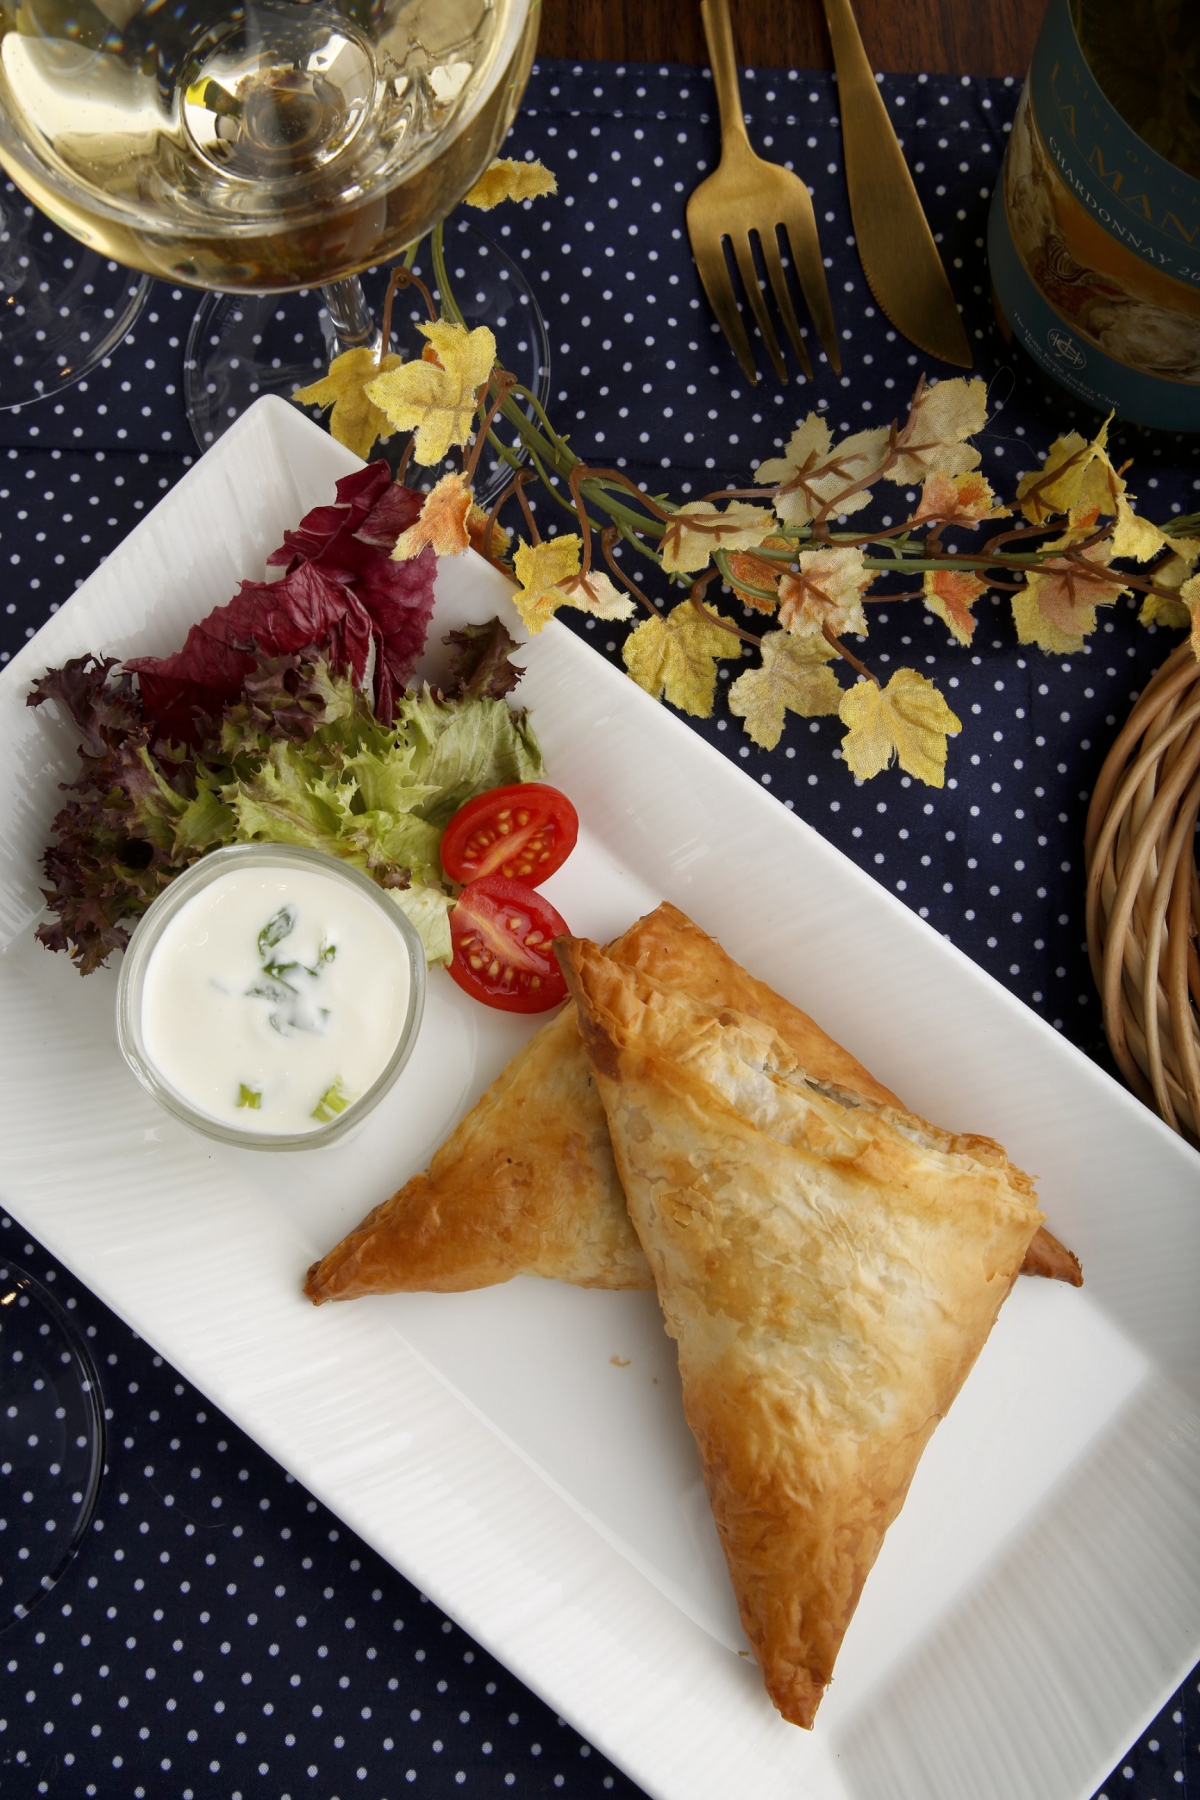 Baked Filo Pastry with Chicken, Cheese, Spinach, Greek Yoghurt Lemon Sauce – HK$50